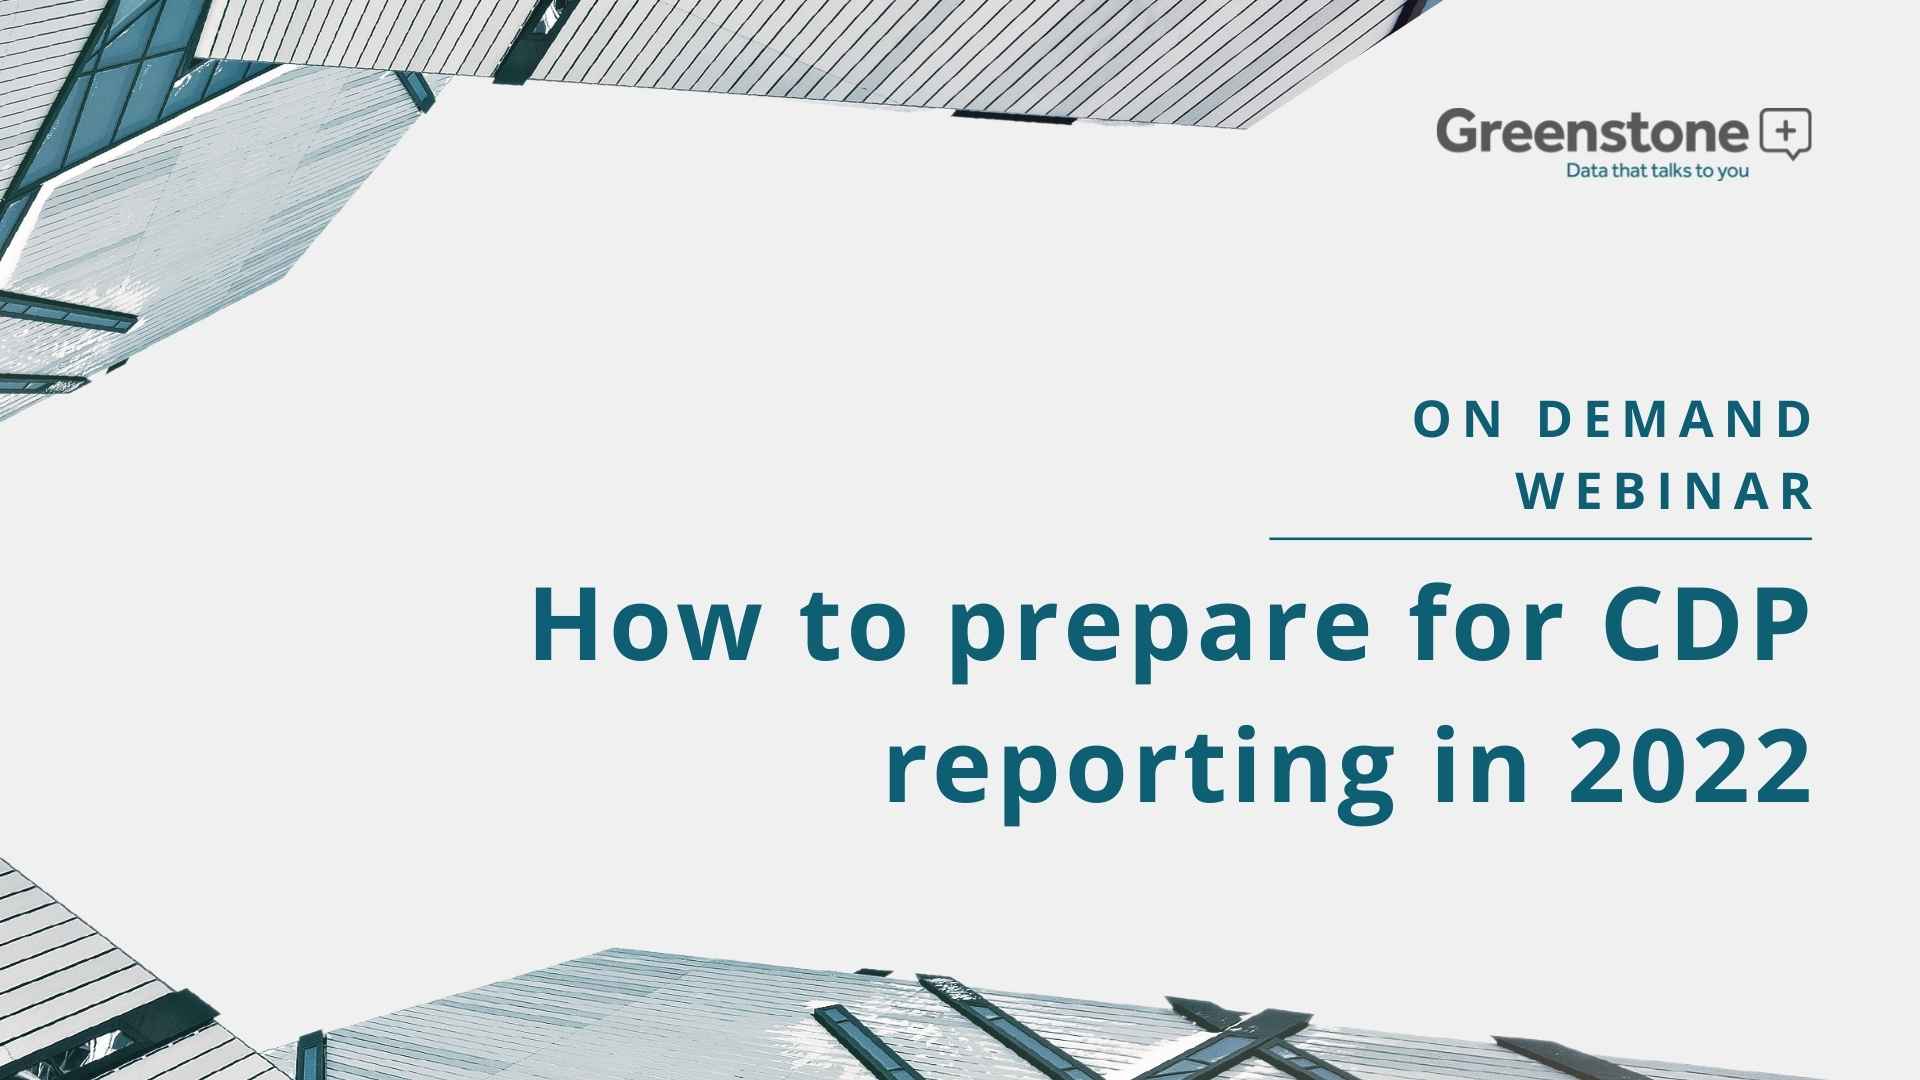 How to prepare for CDP reporting in 2022